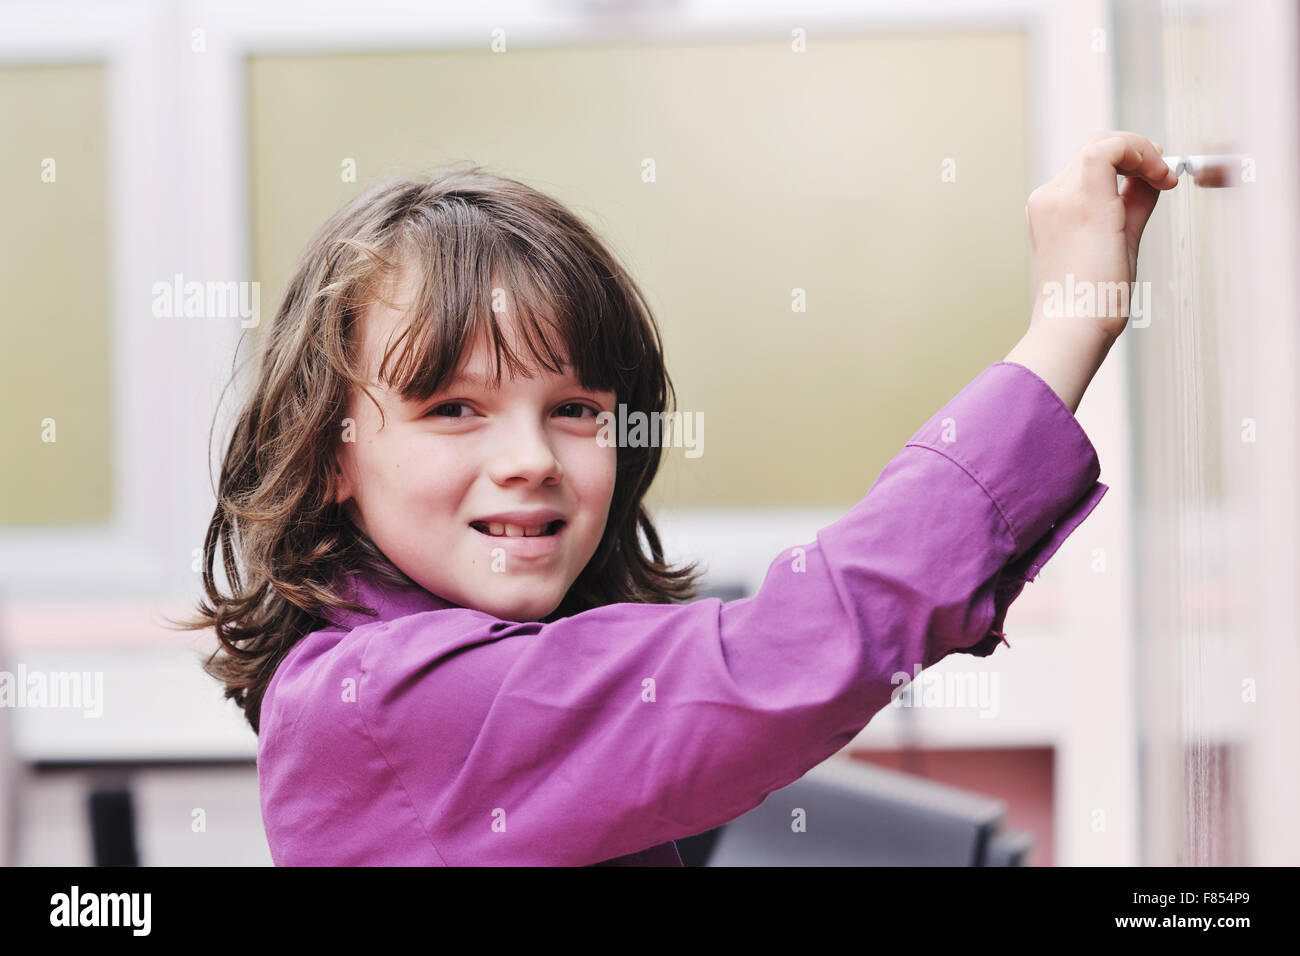 happy school girl on math classes finding solution and solving problems Stock Photo